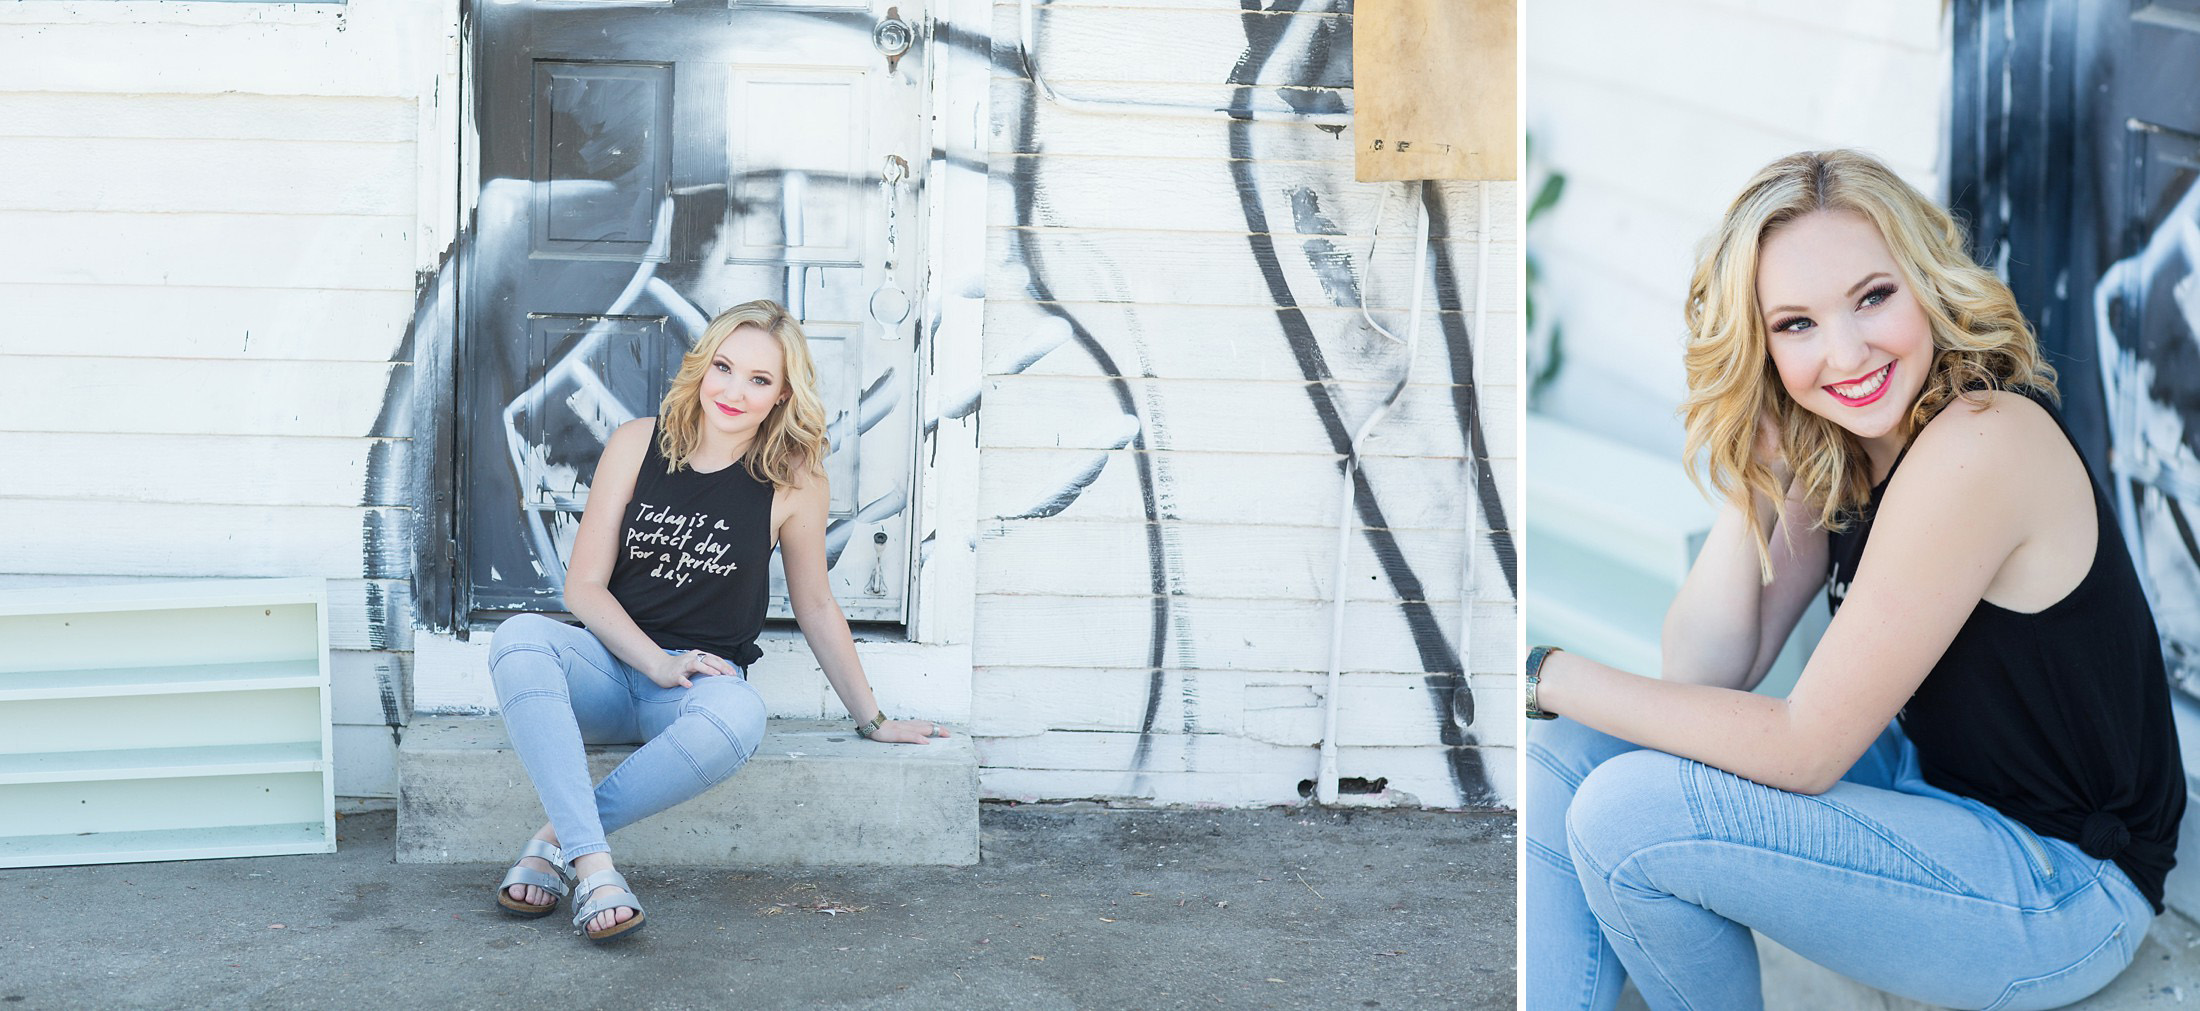 Senior Pictures in Venice California by Tara Rochelle Photogrpahy